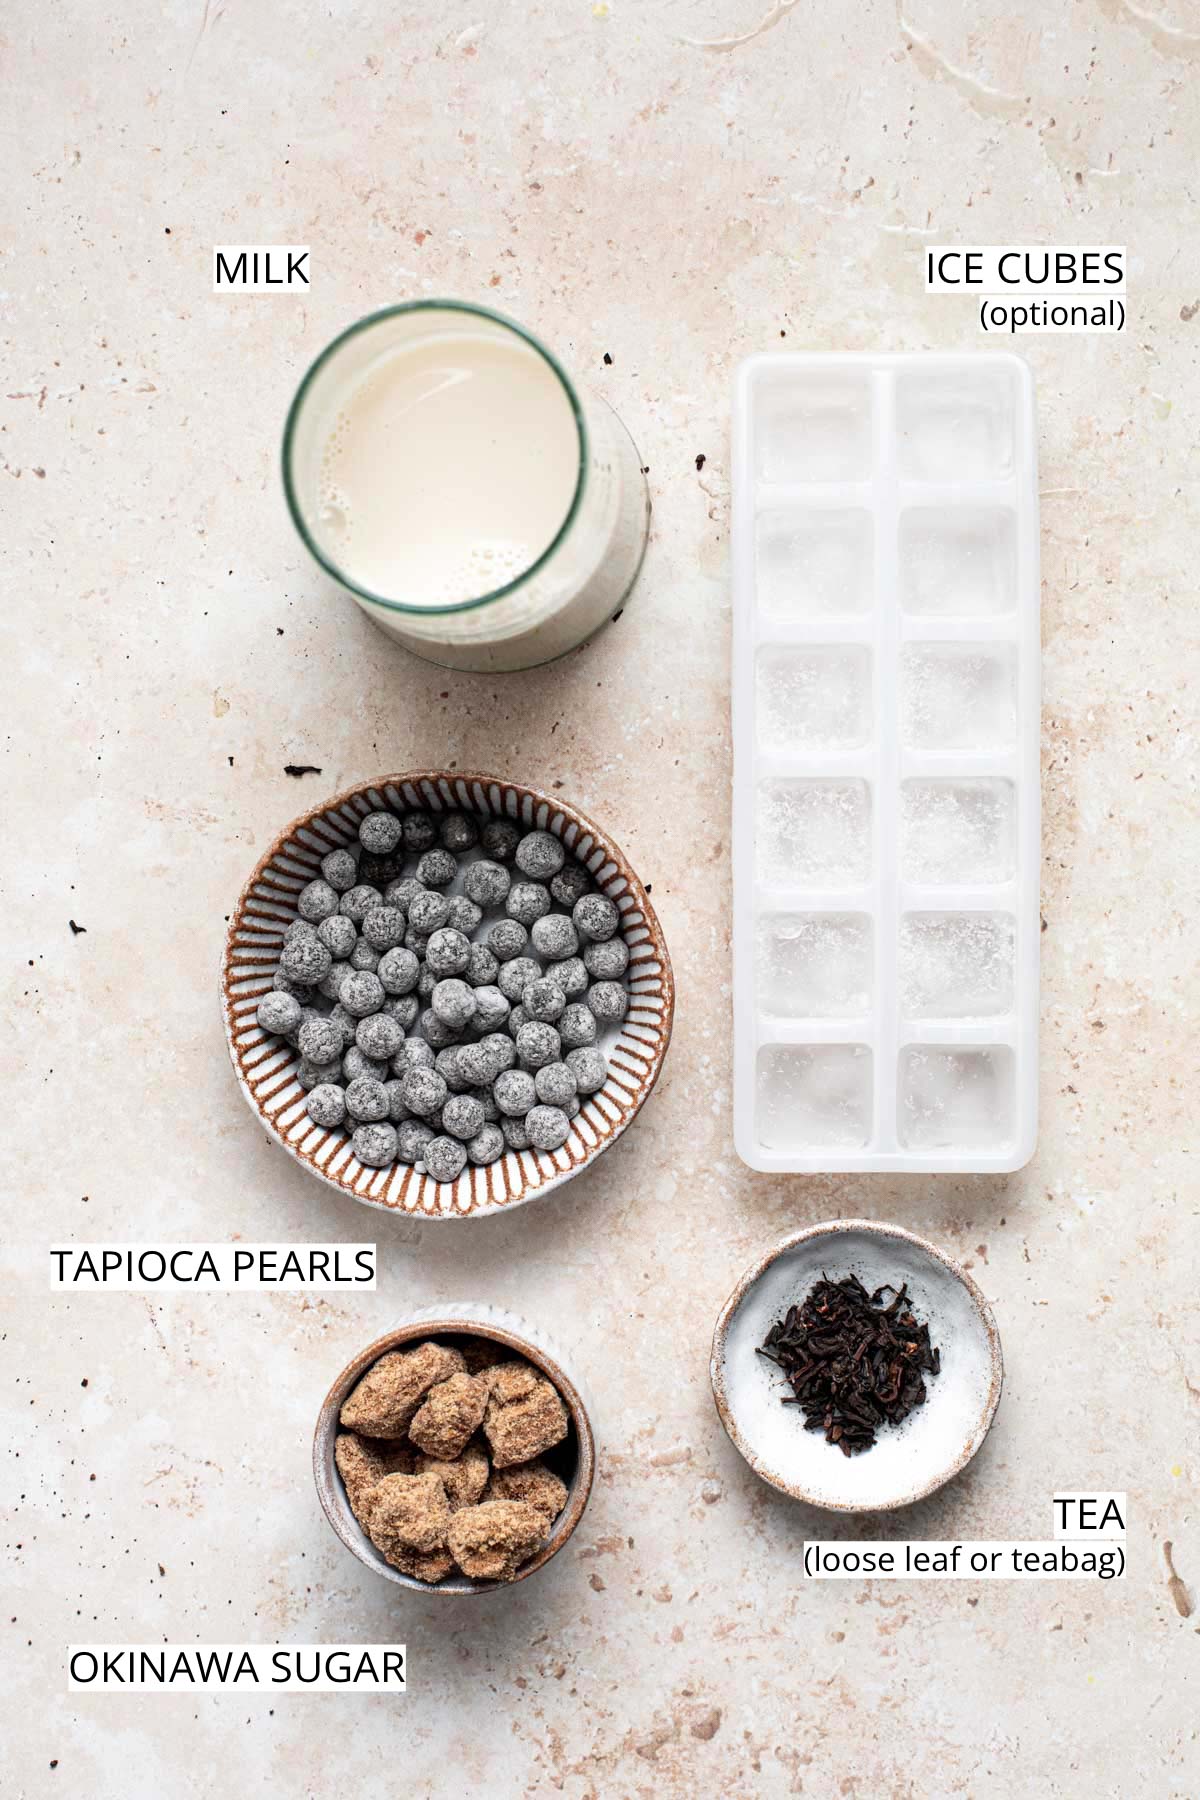 Milk, sugar, tea, ice cubes and tapioca pearls laid out on a flat surface.